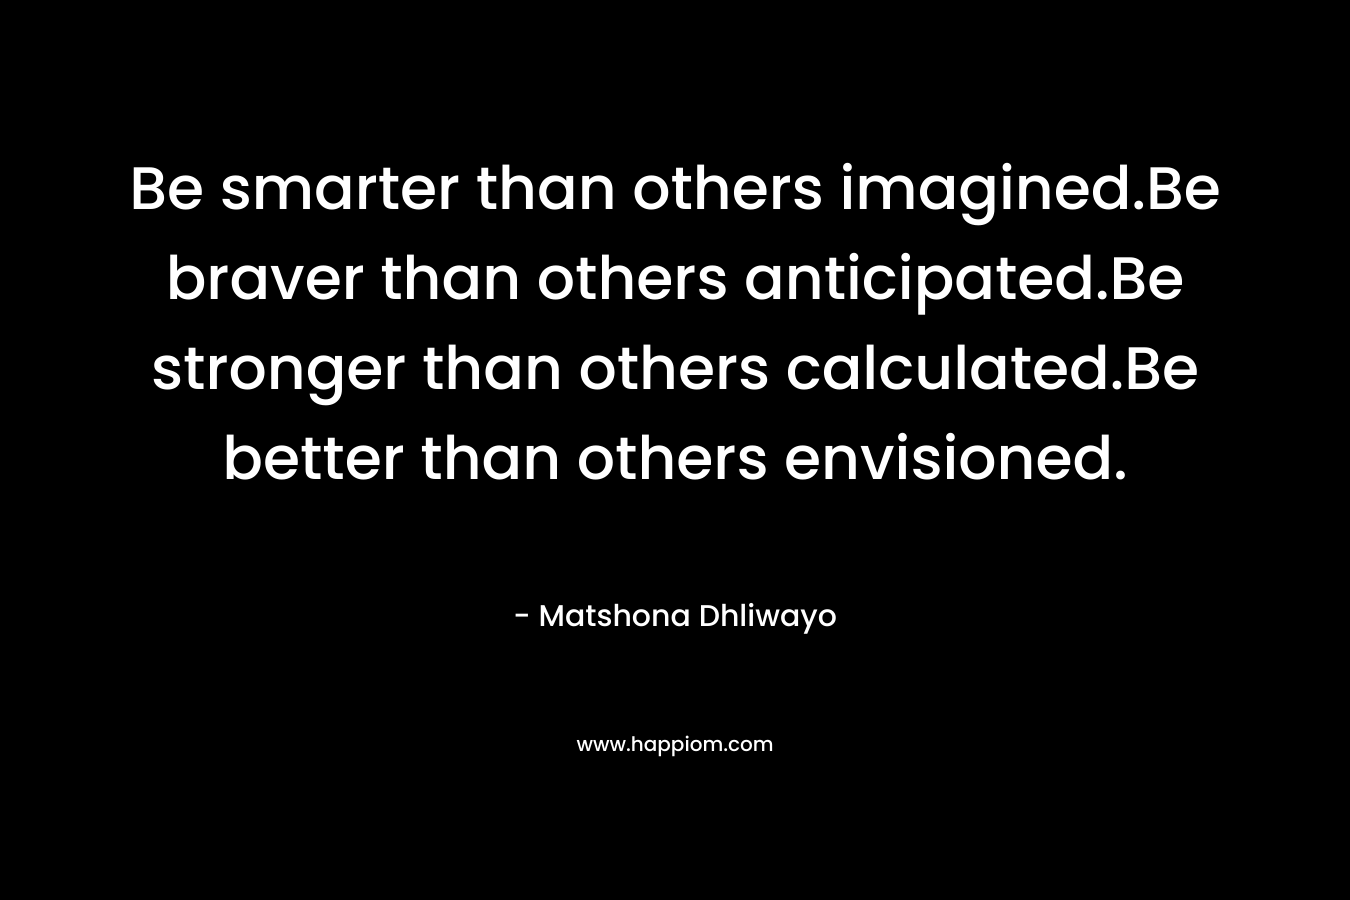 Be smarter than others imagined.Be braver than others anticipated.Be stronger than others calculated.Be better than others envisioned. – Matshona Dhliwayo